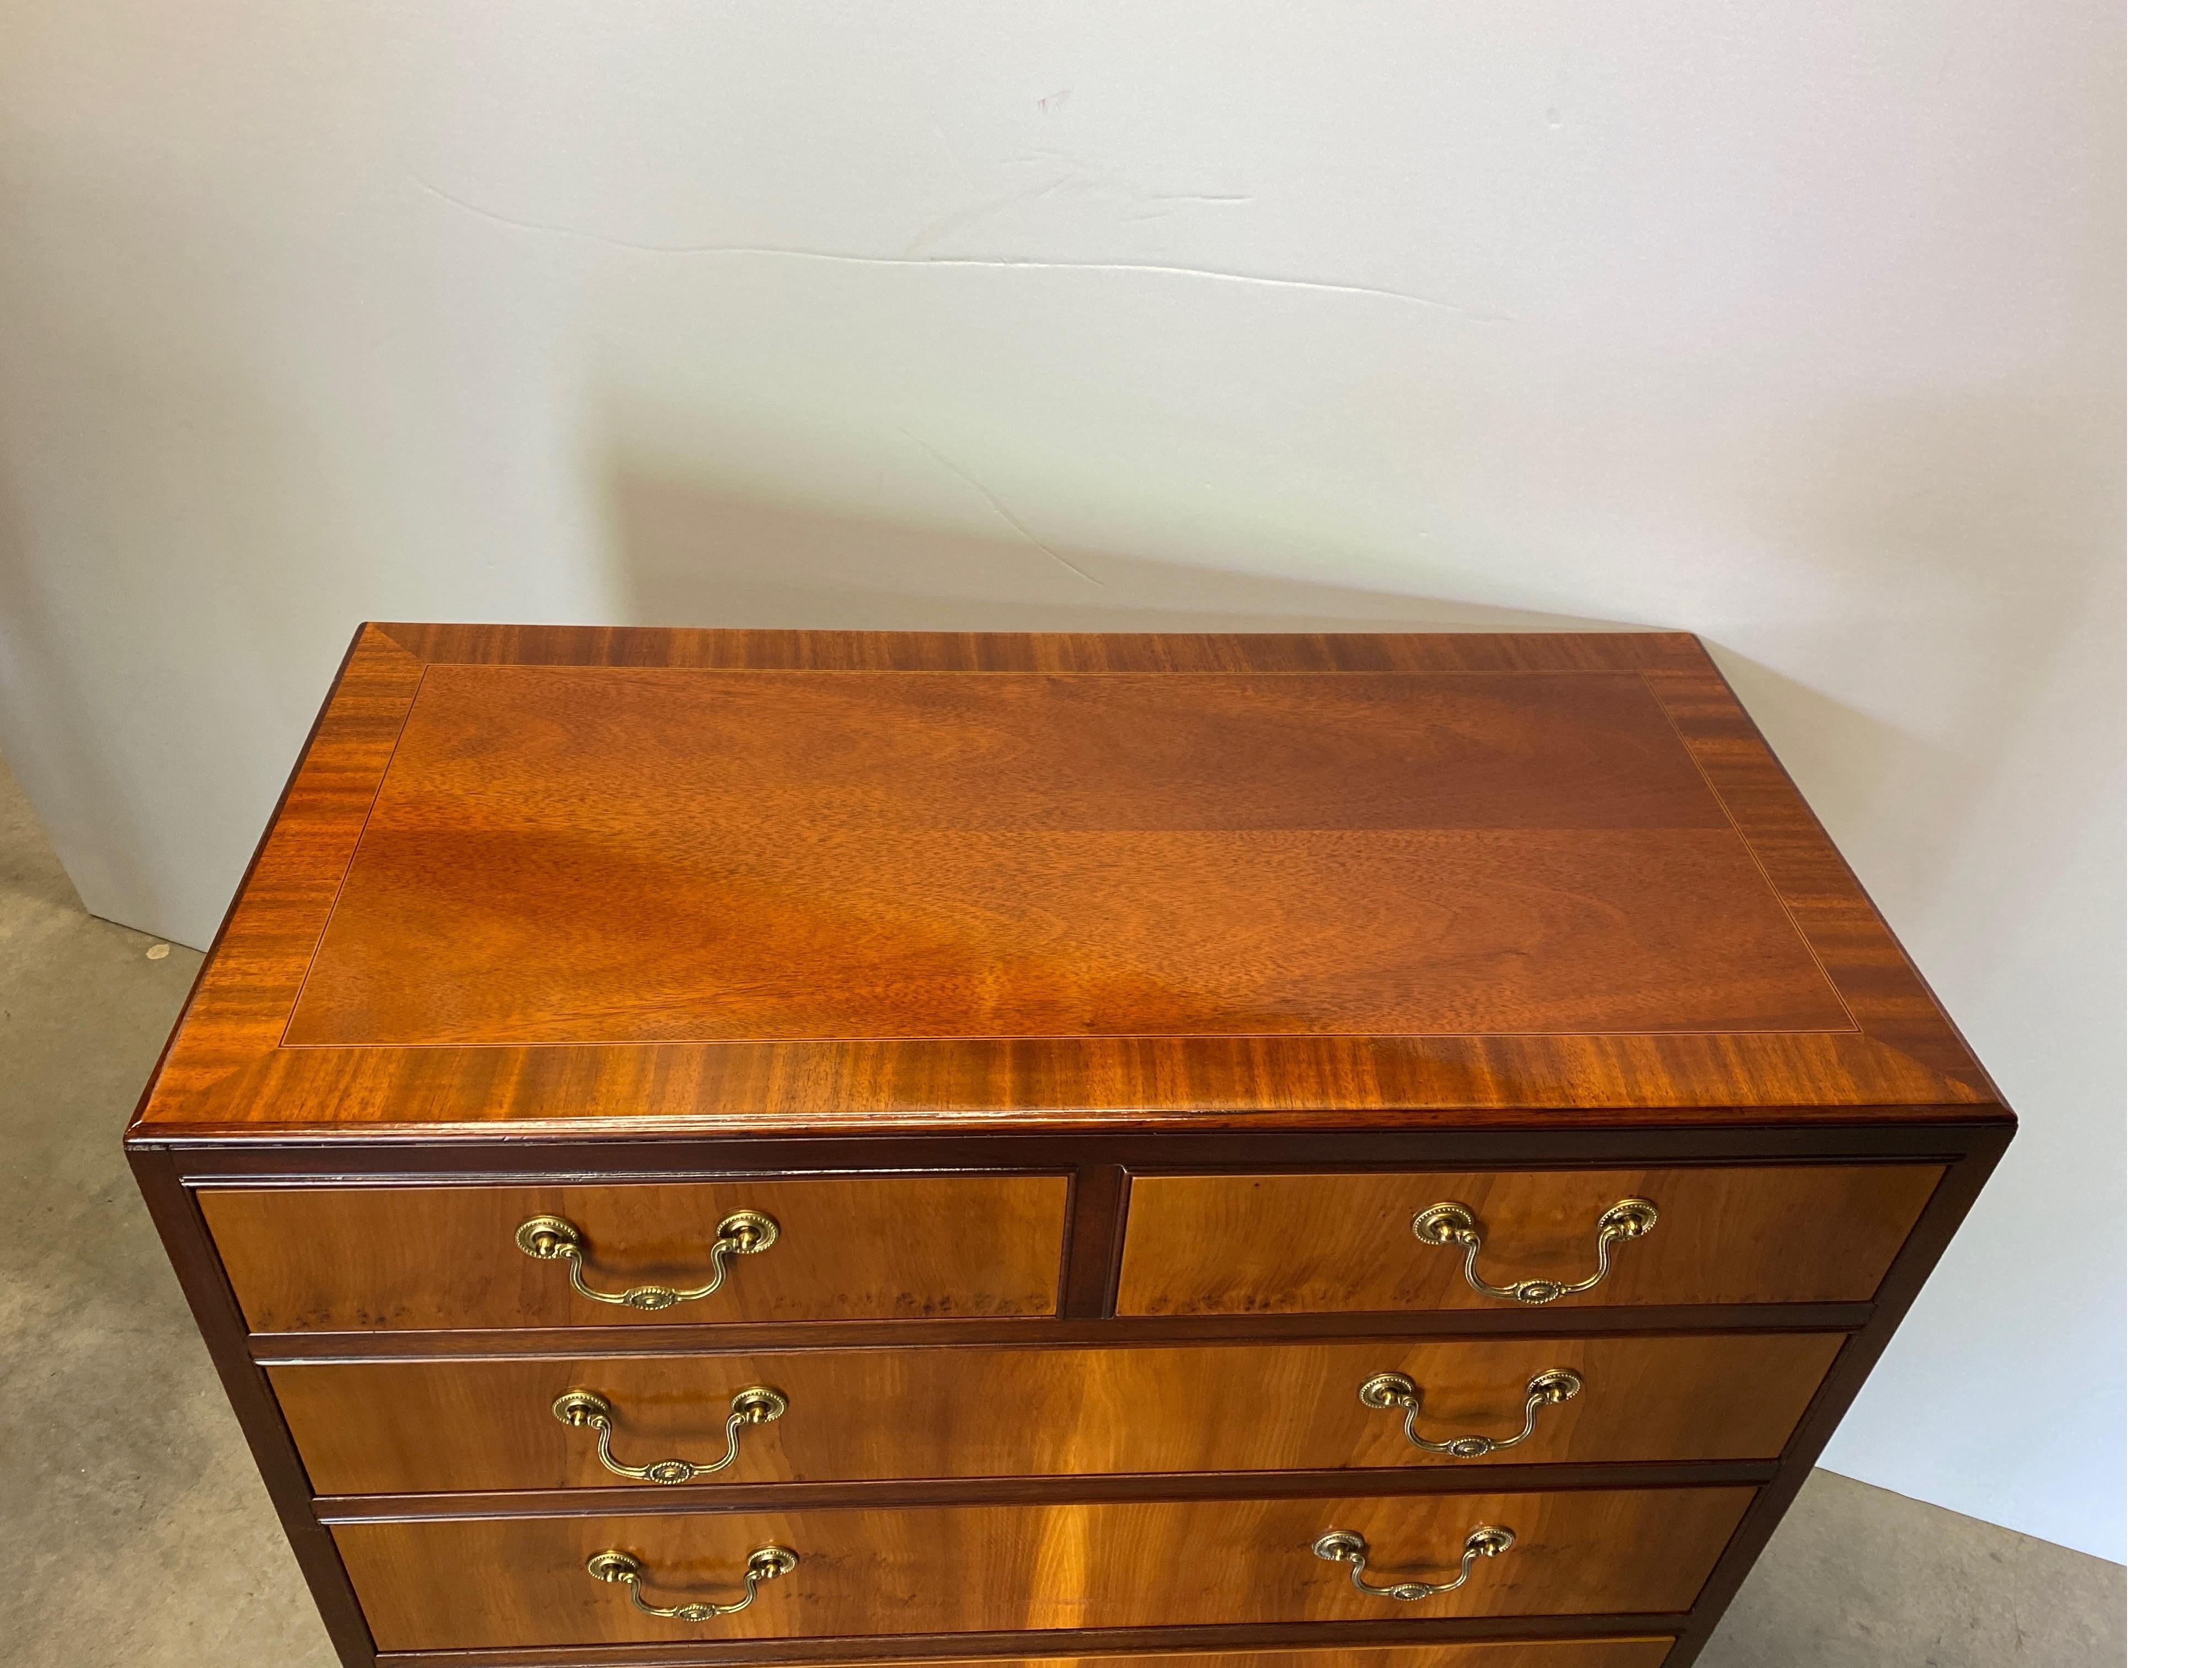 Federal Mahogany and Yew Wood Bachelors Chest by Baker Furniture